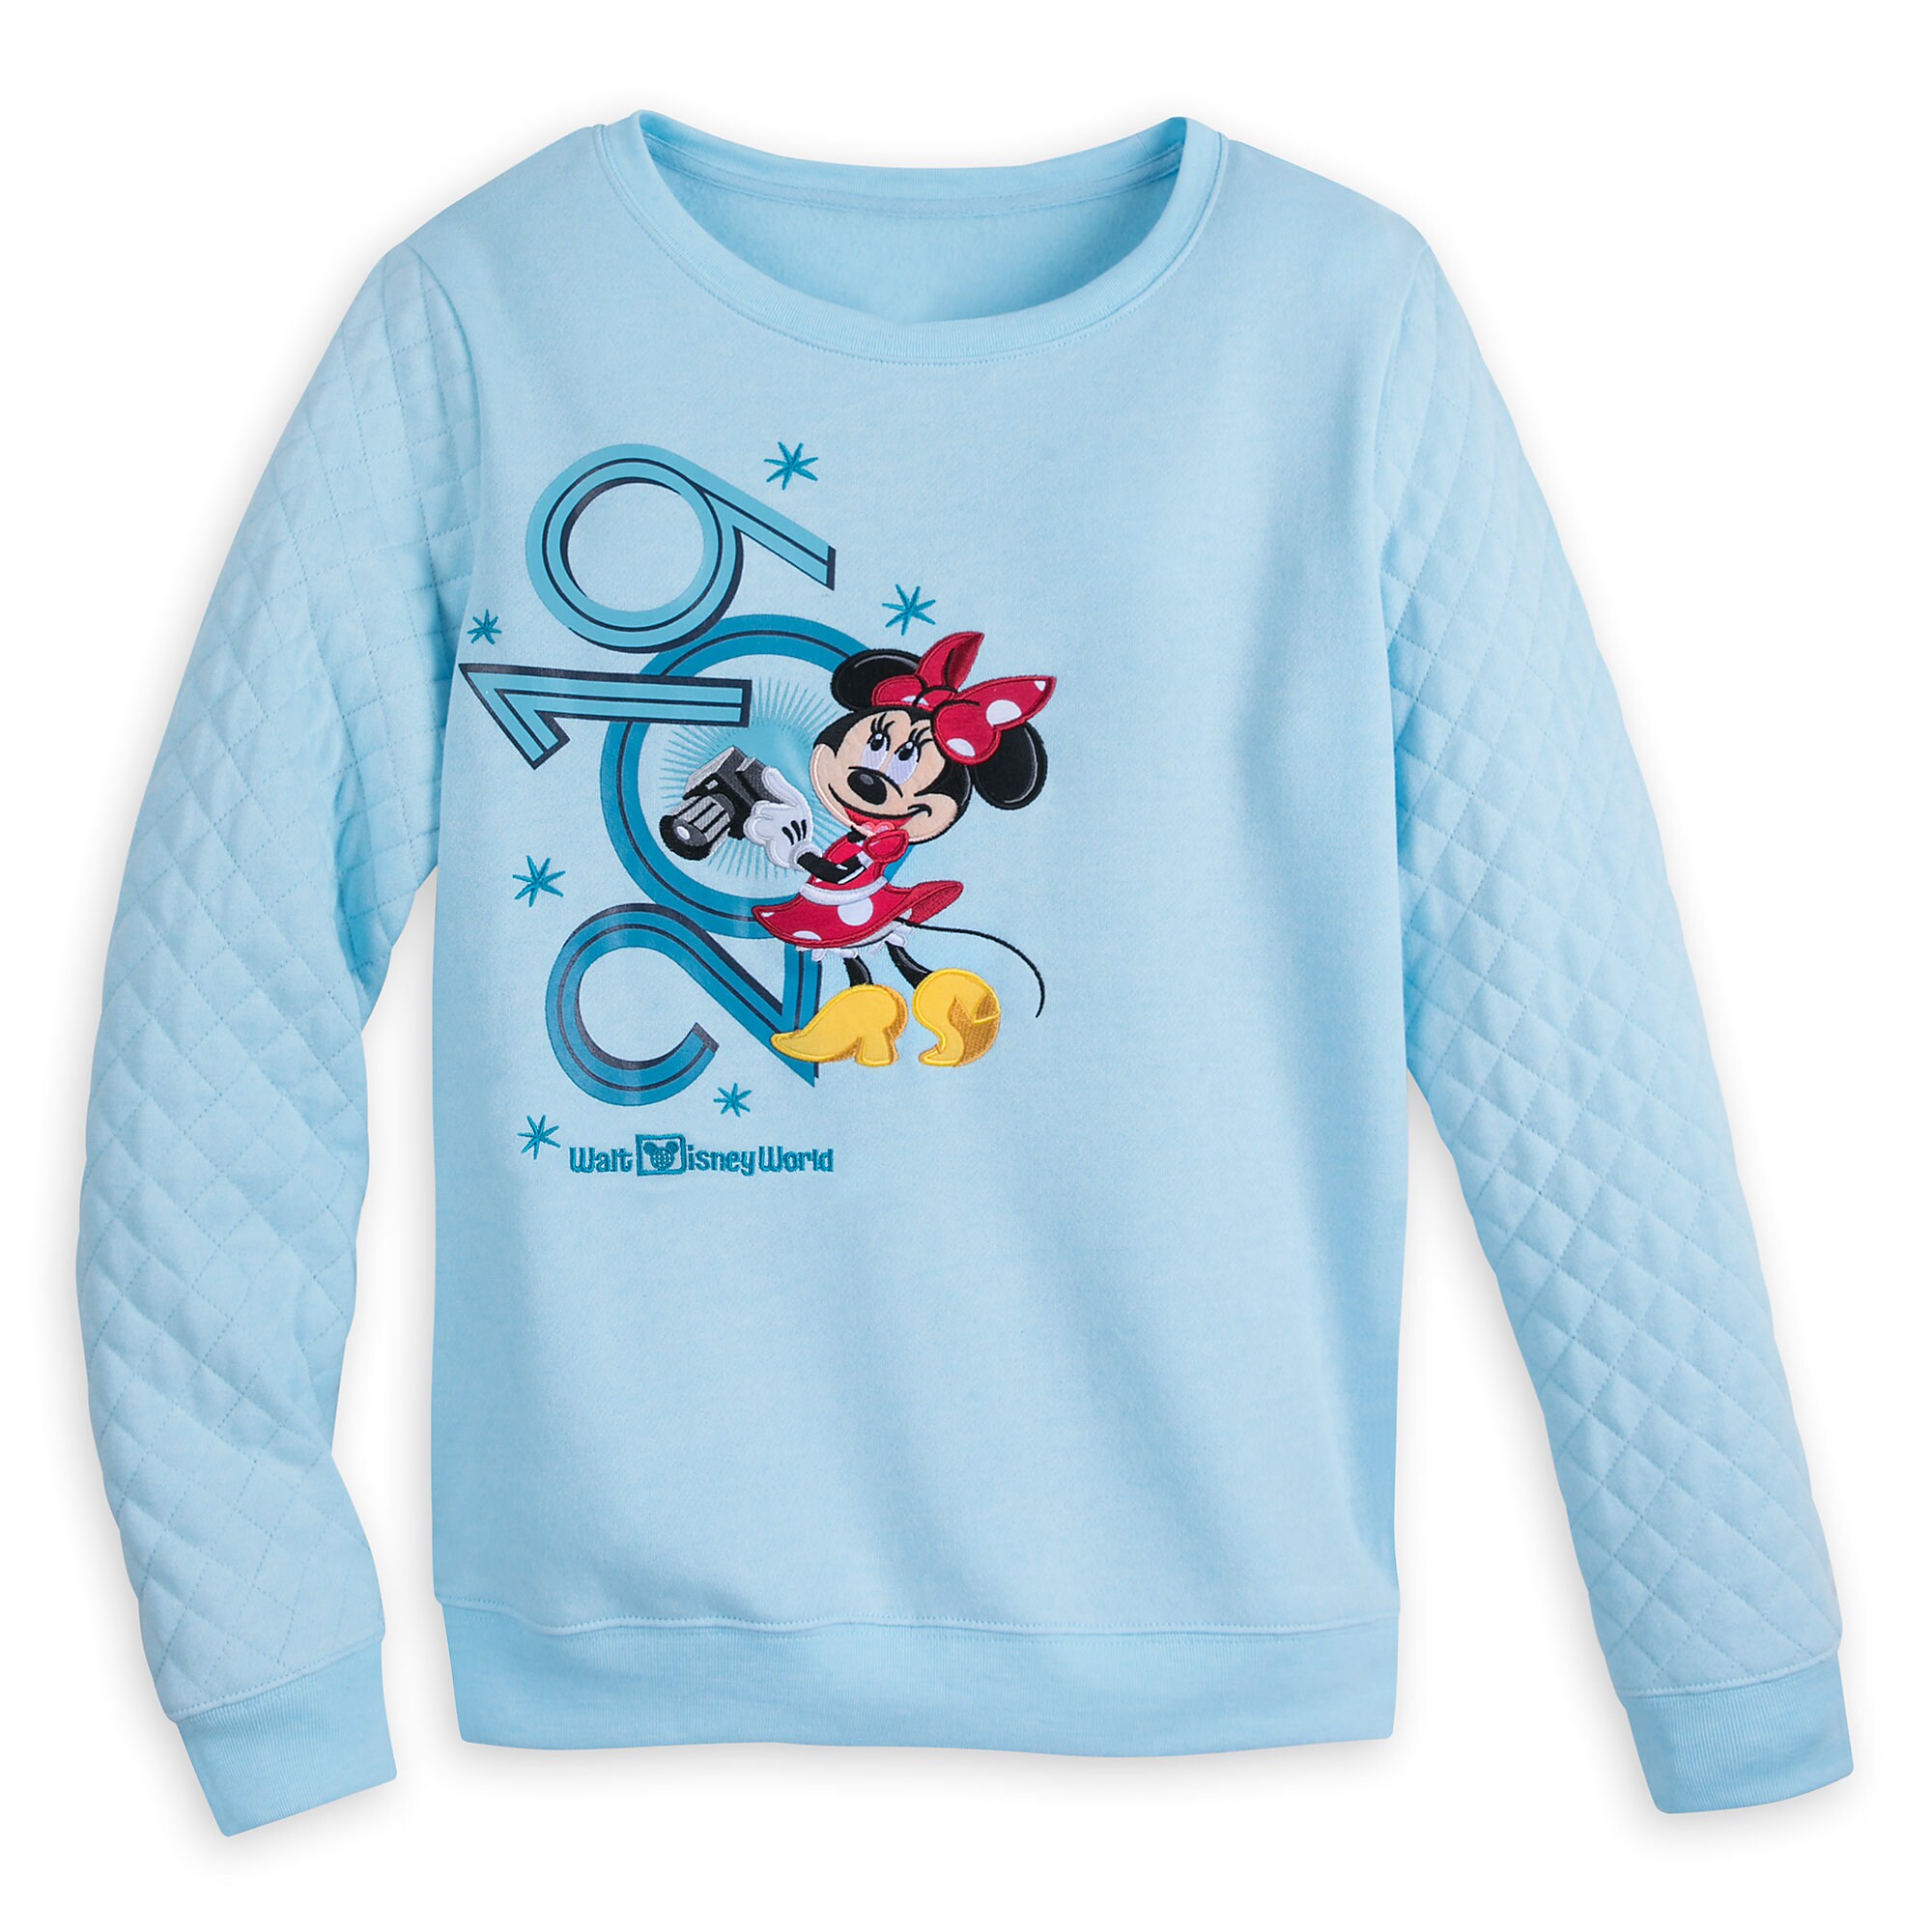 Minnie Mouse Pullover for Women - Walt Disney World 2019